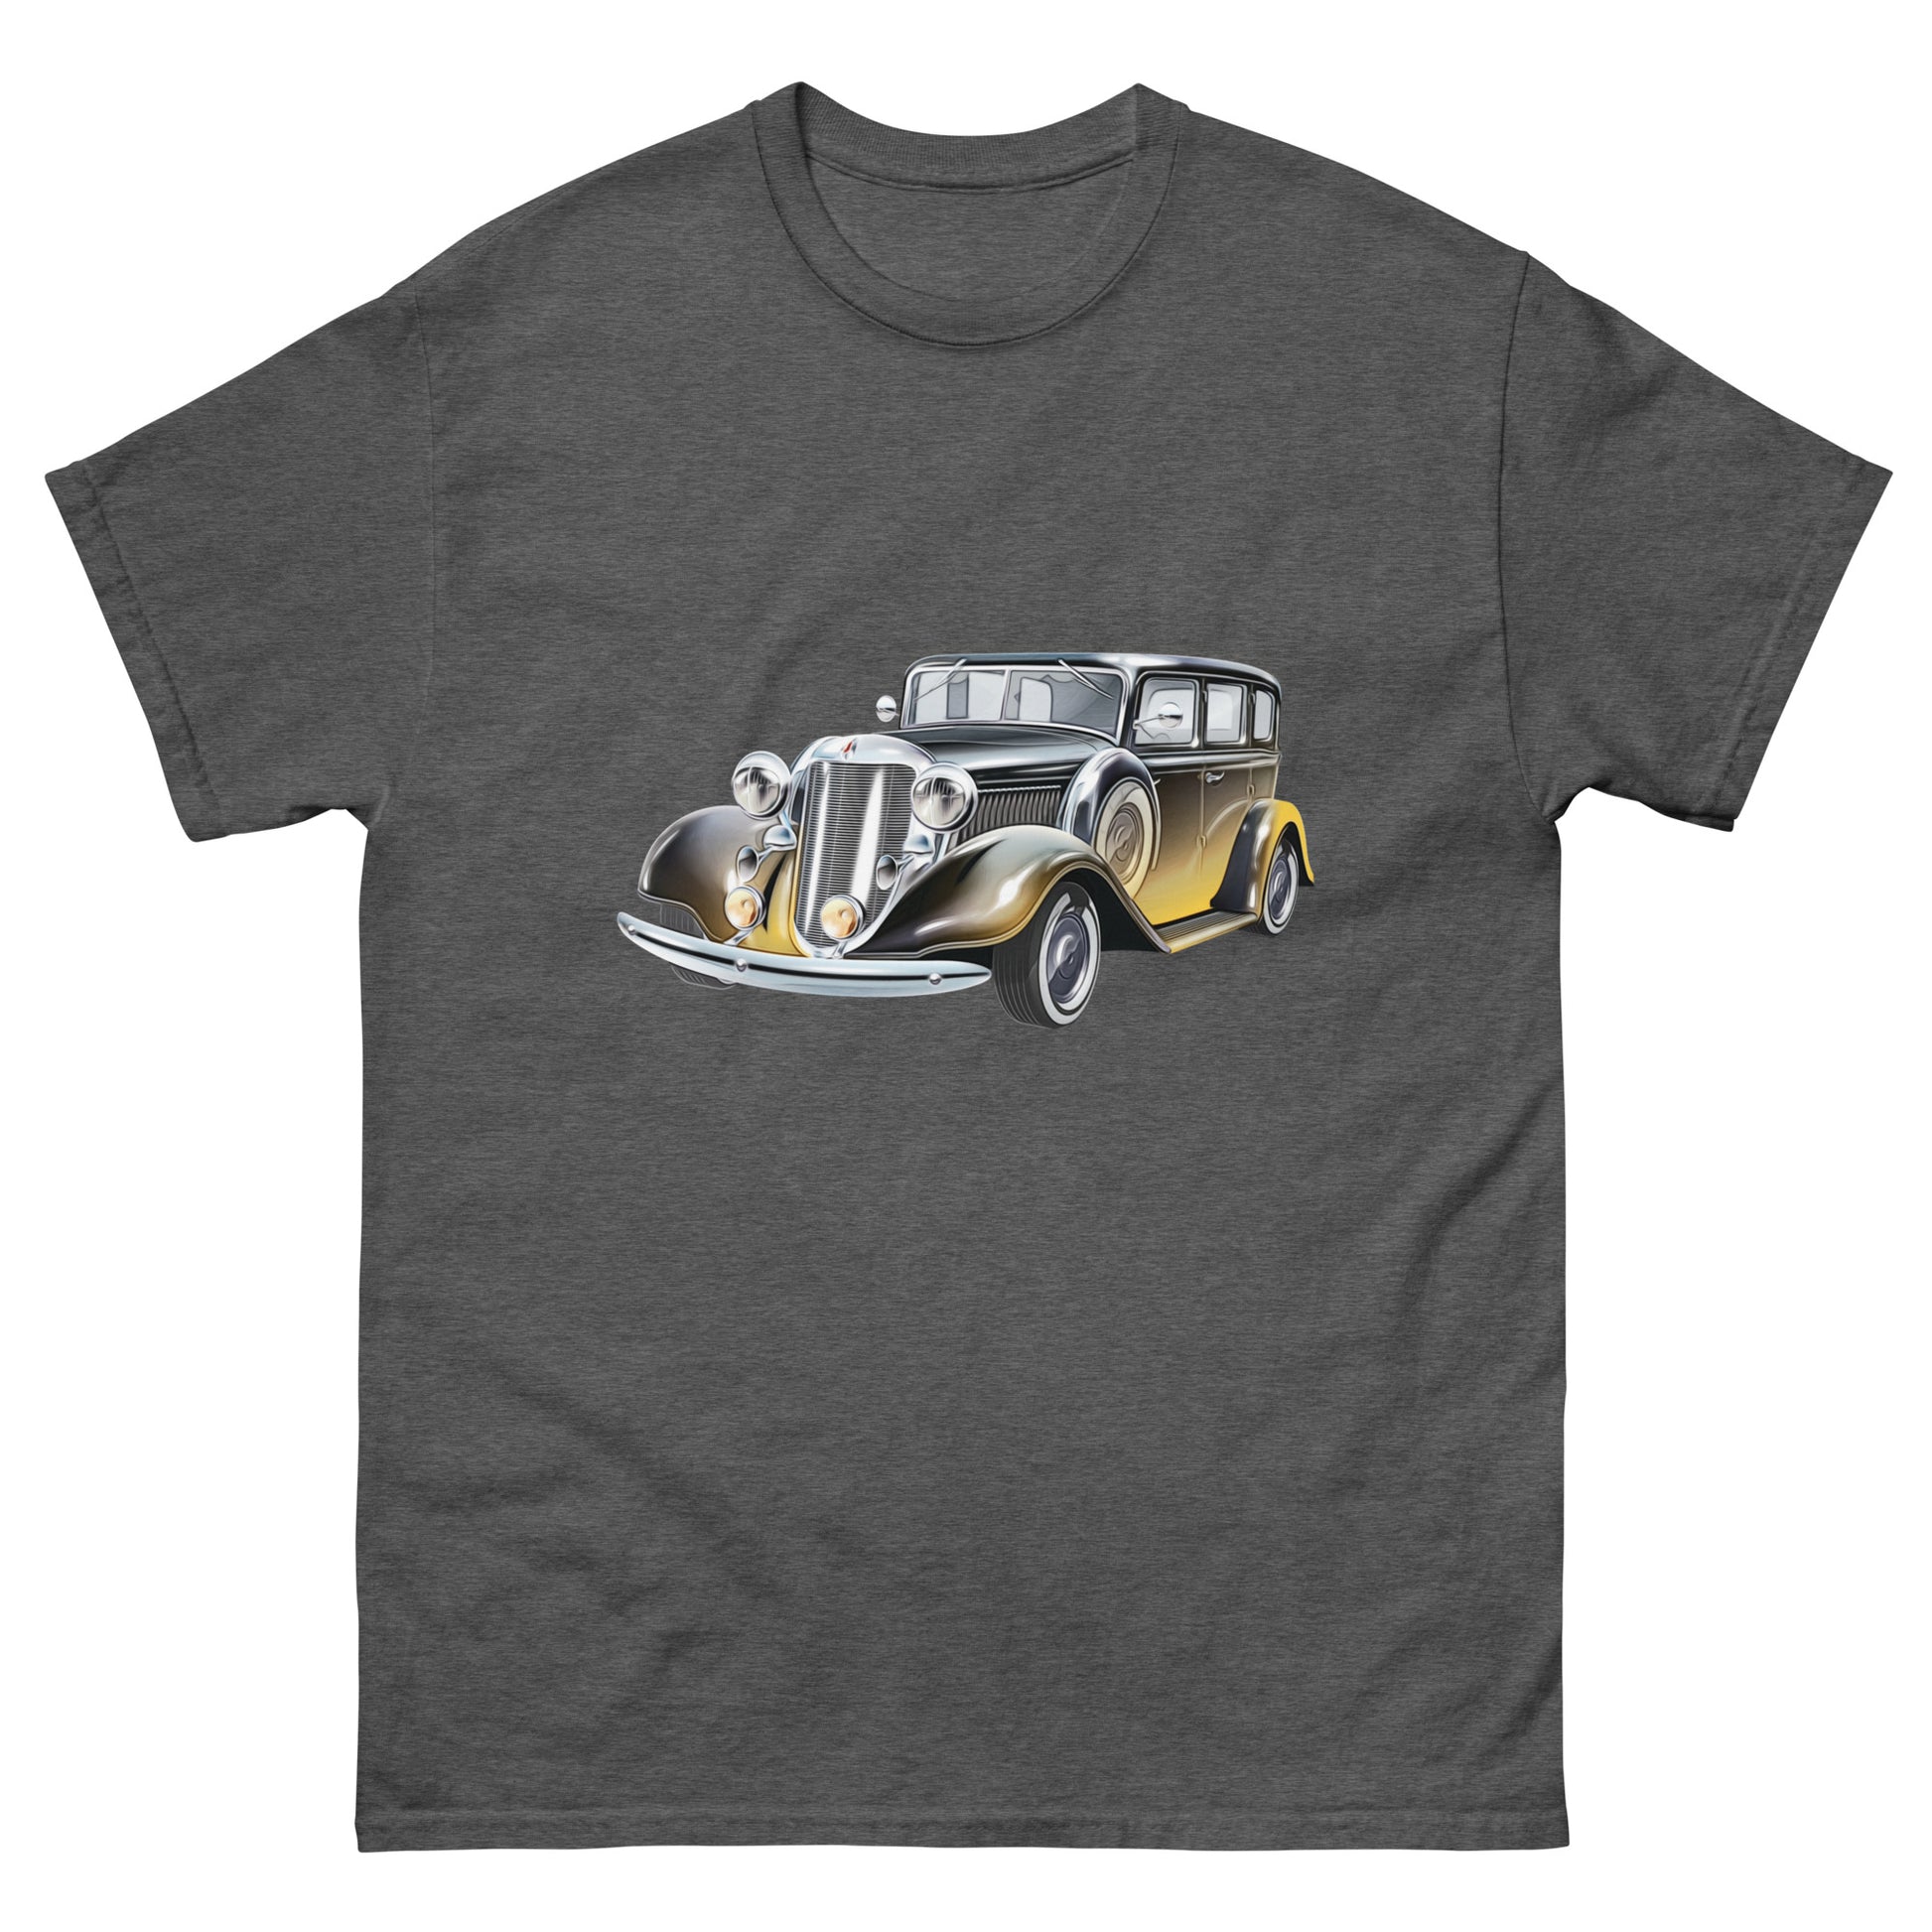 grey t-shirt with picture of vintage car